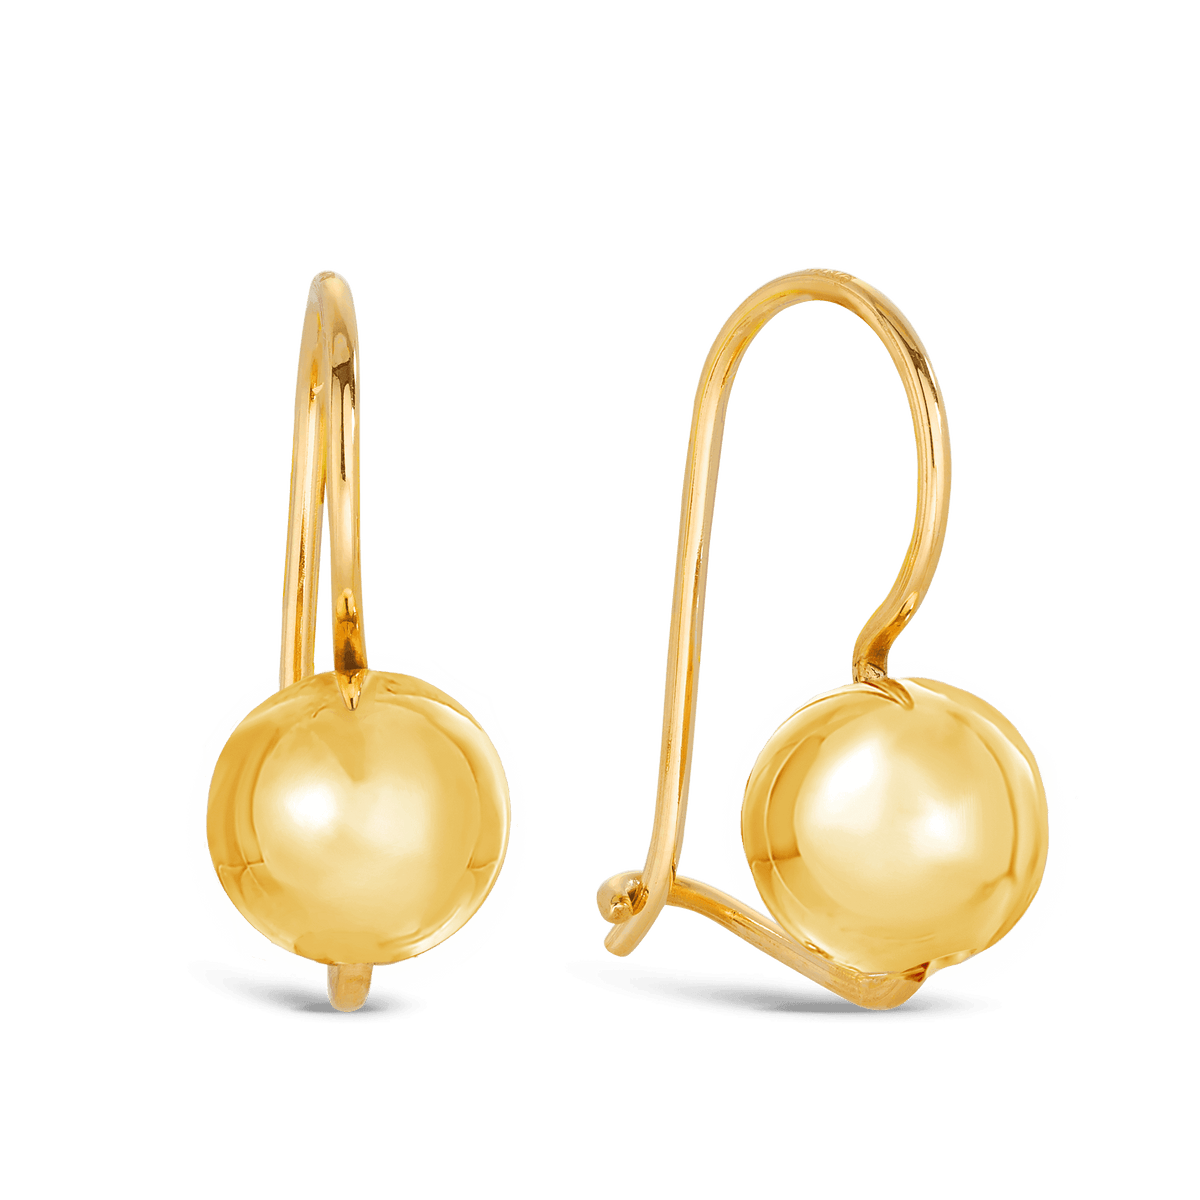 8mm Round Euroball Earrings in 9ct Yellow Gold - Wallace Bishop